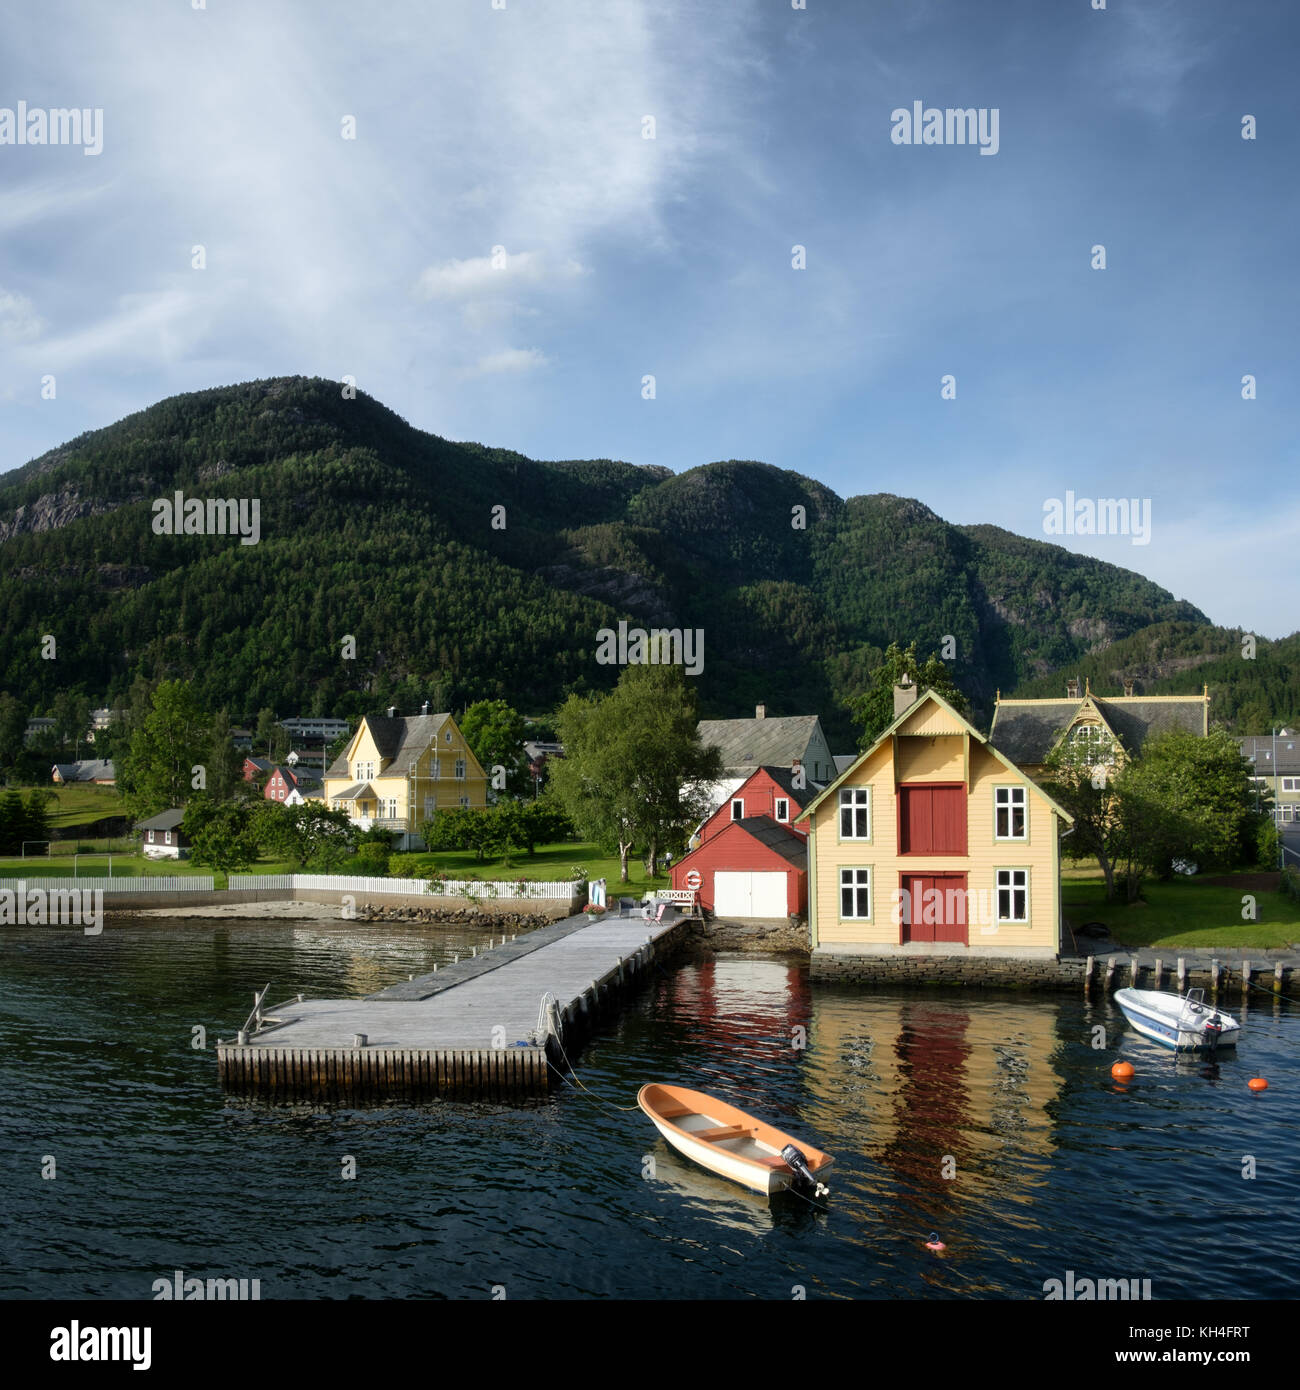 Typical norwegian landscape with red house Stock Photo